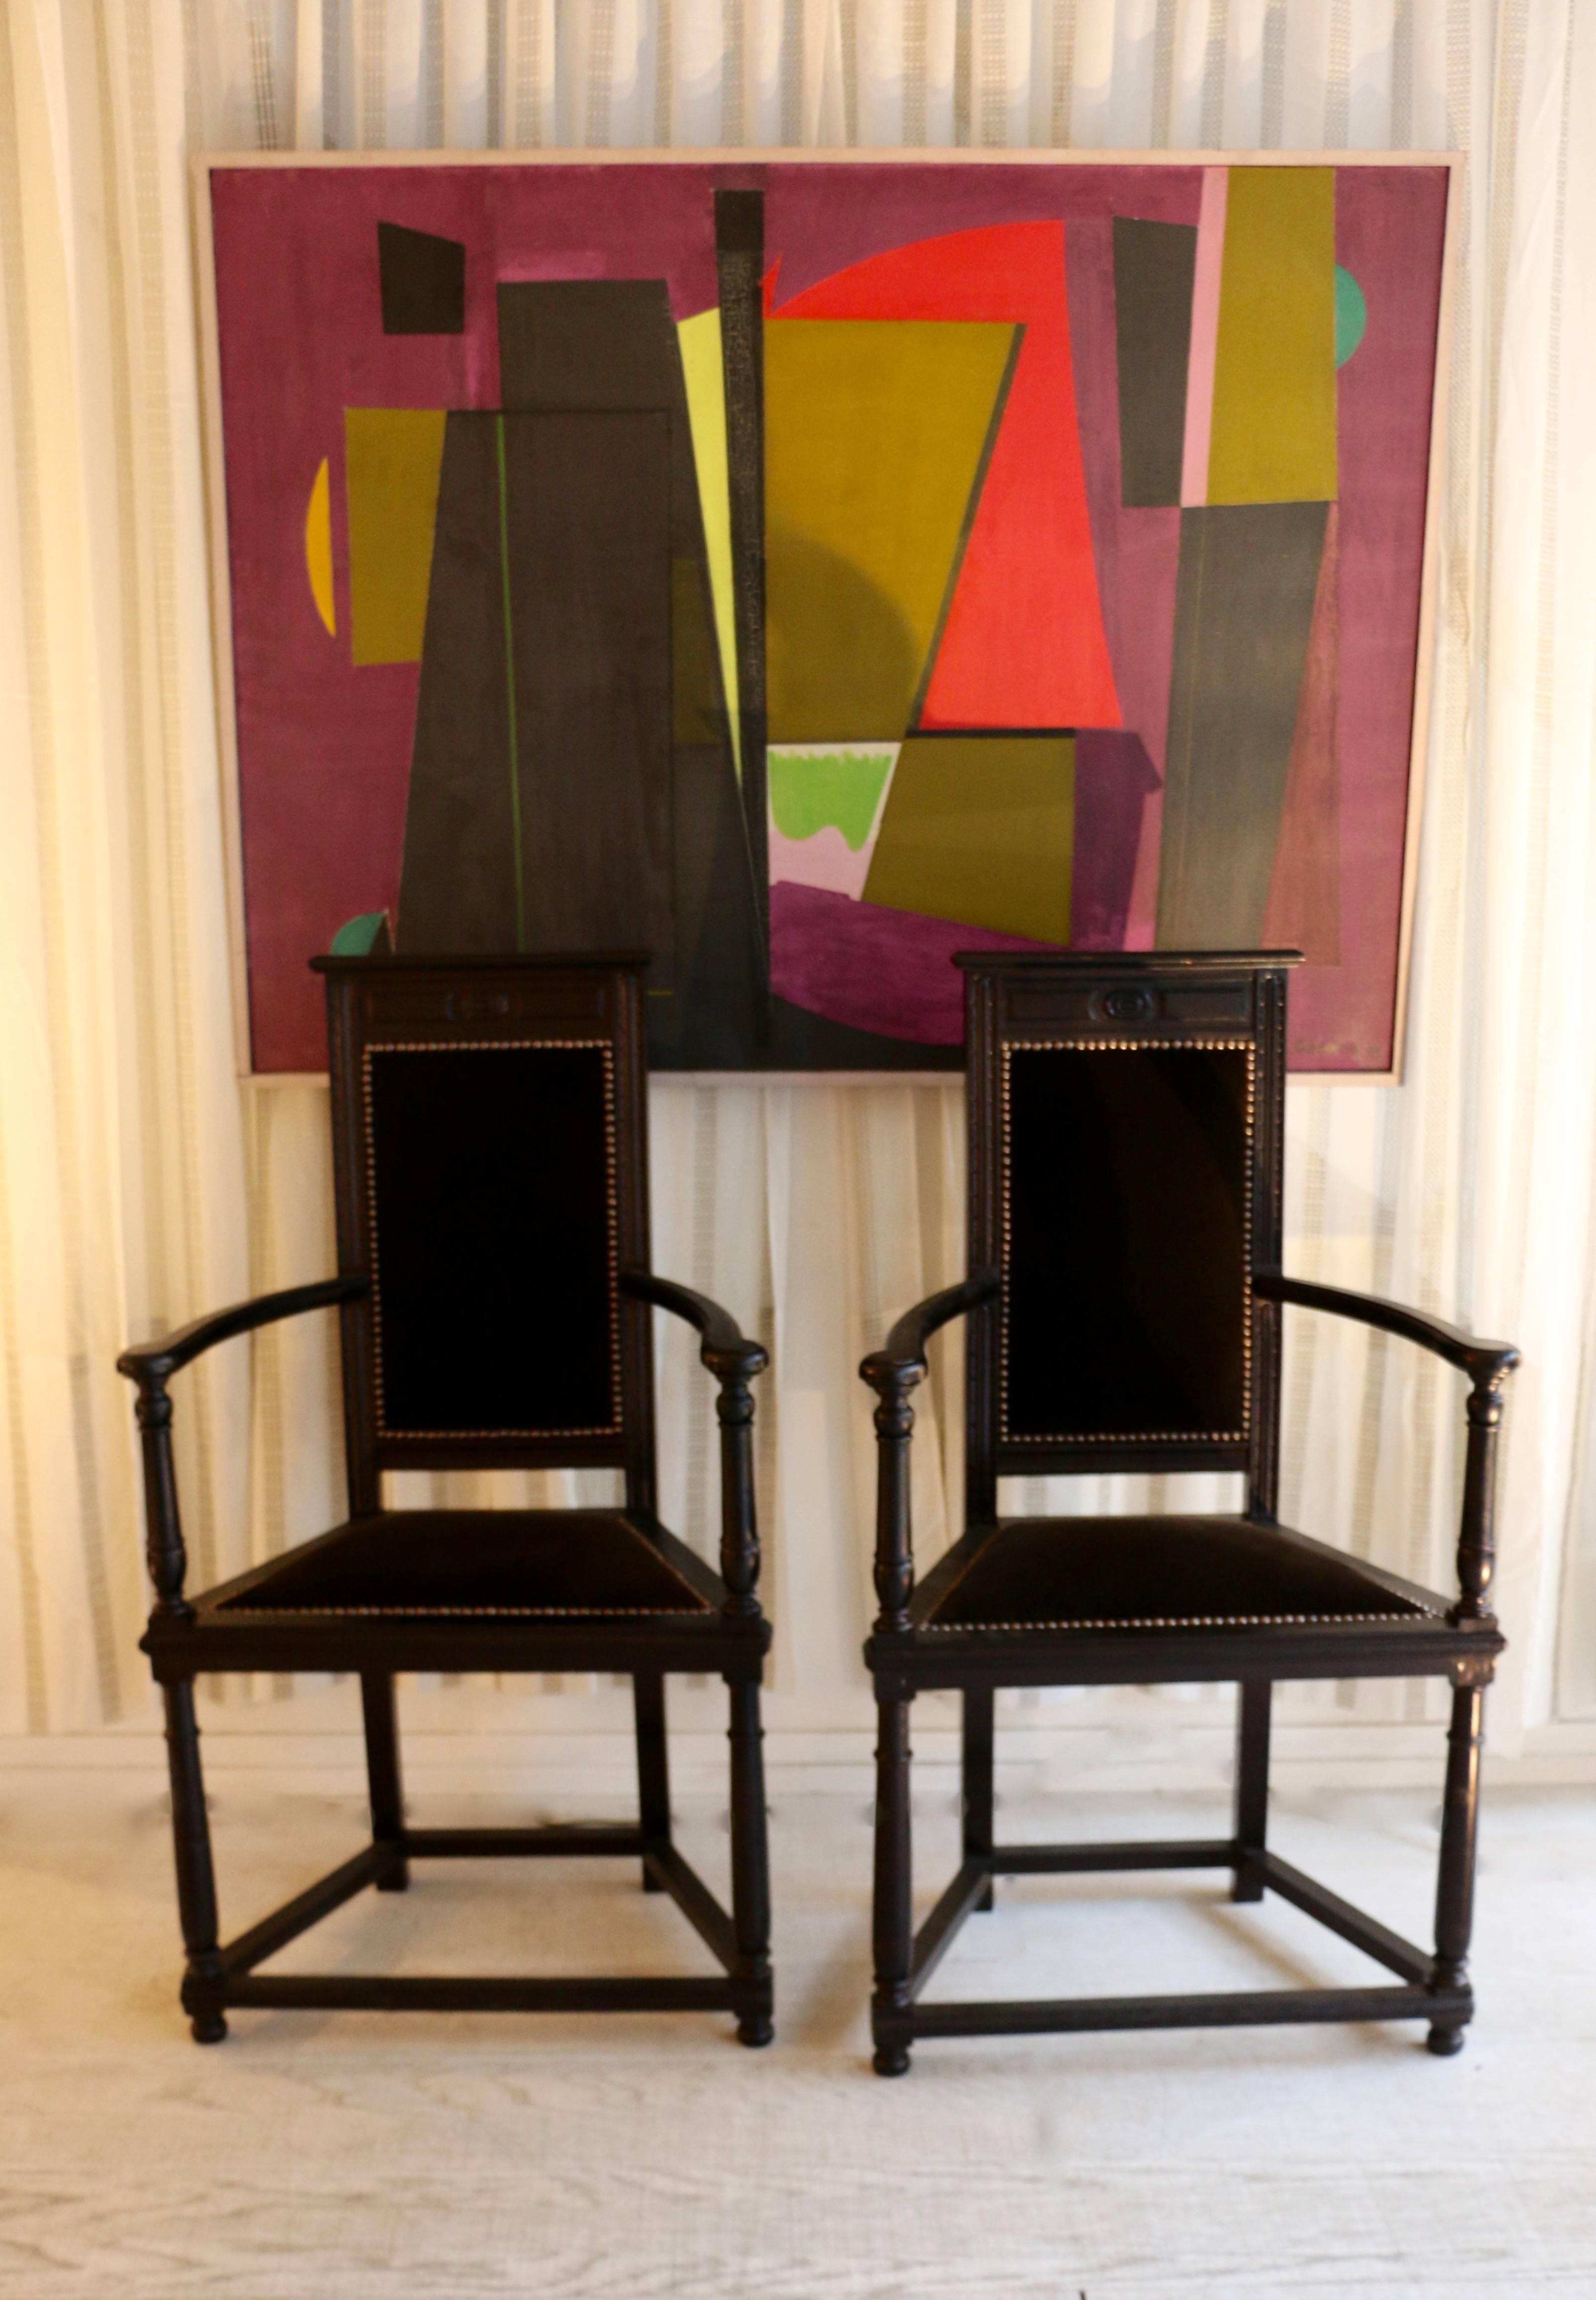 Pair of black wooden armchairs. Late 19th century, Europe. 
Reupholster seats and and seatbacks.